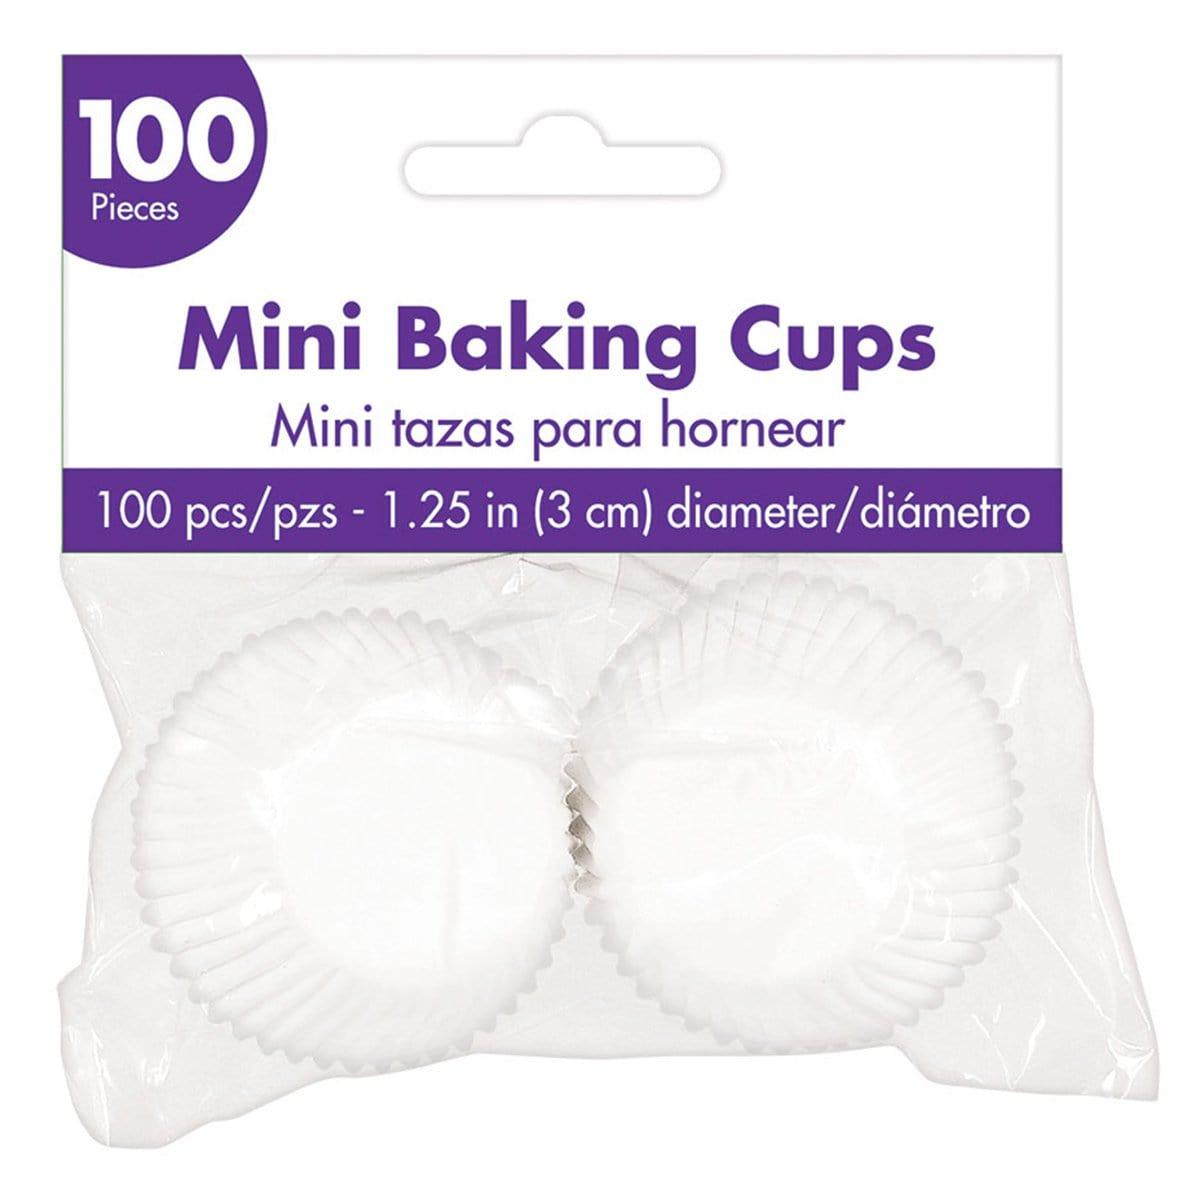 Buy Cake Supplies Mini Cupcake Cases 100/pkg - White sold at Party Expert